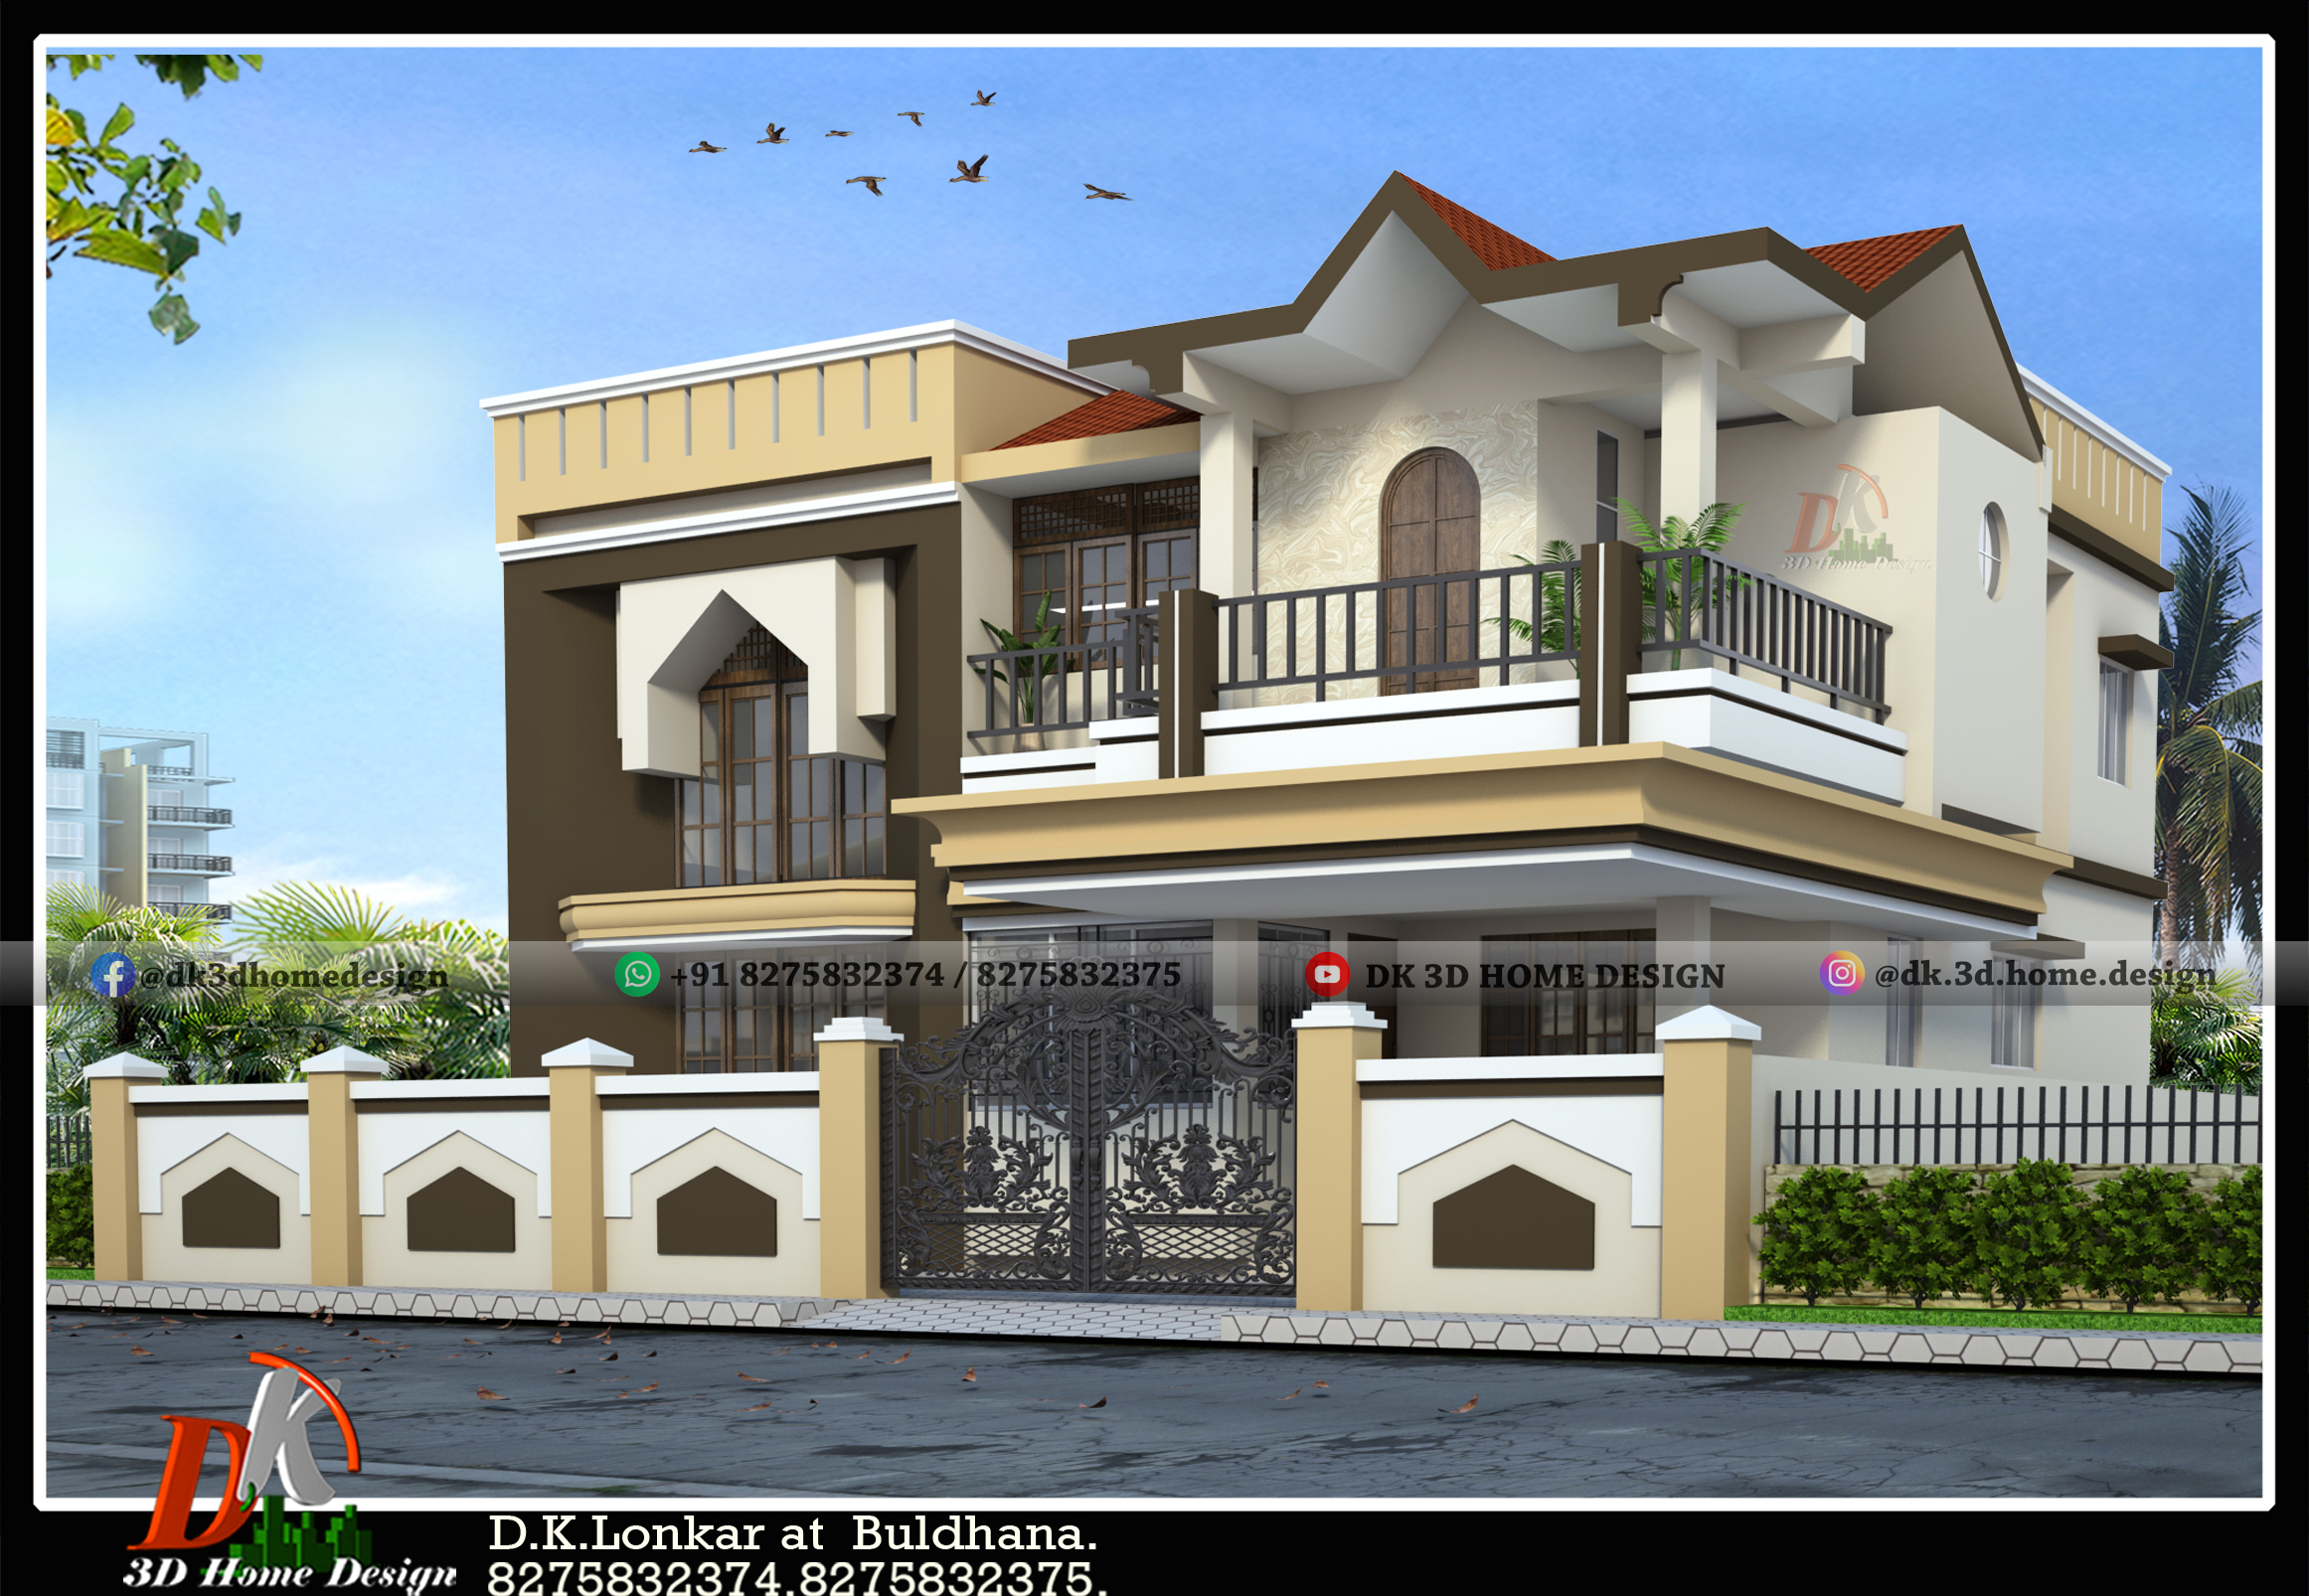 Simple classic Indian style bungalow front elevation design